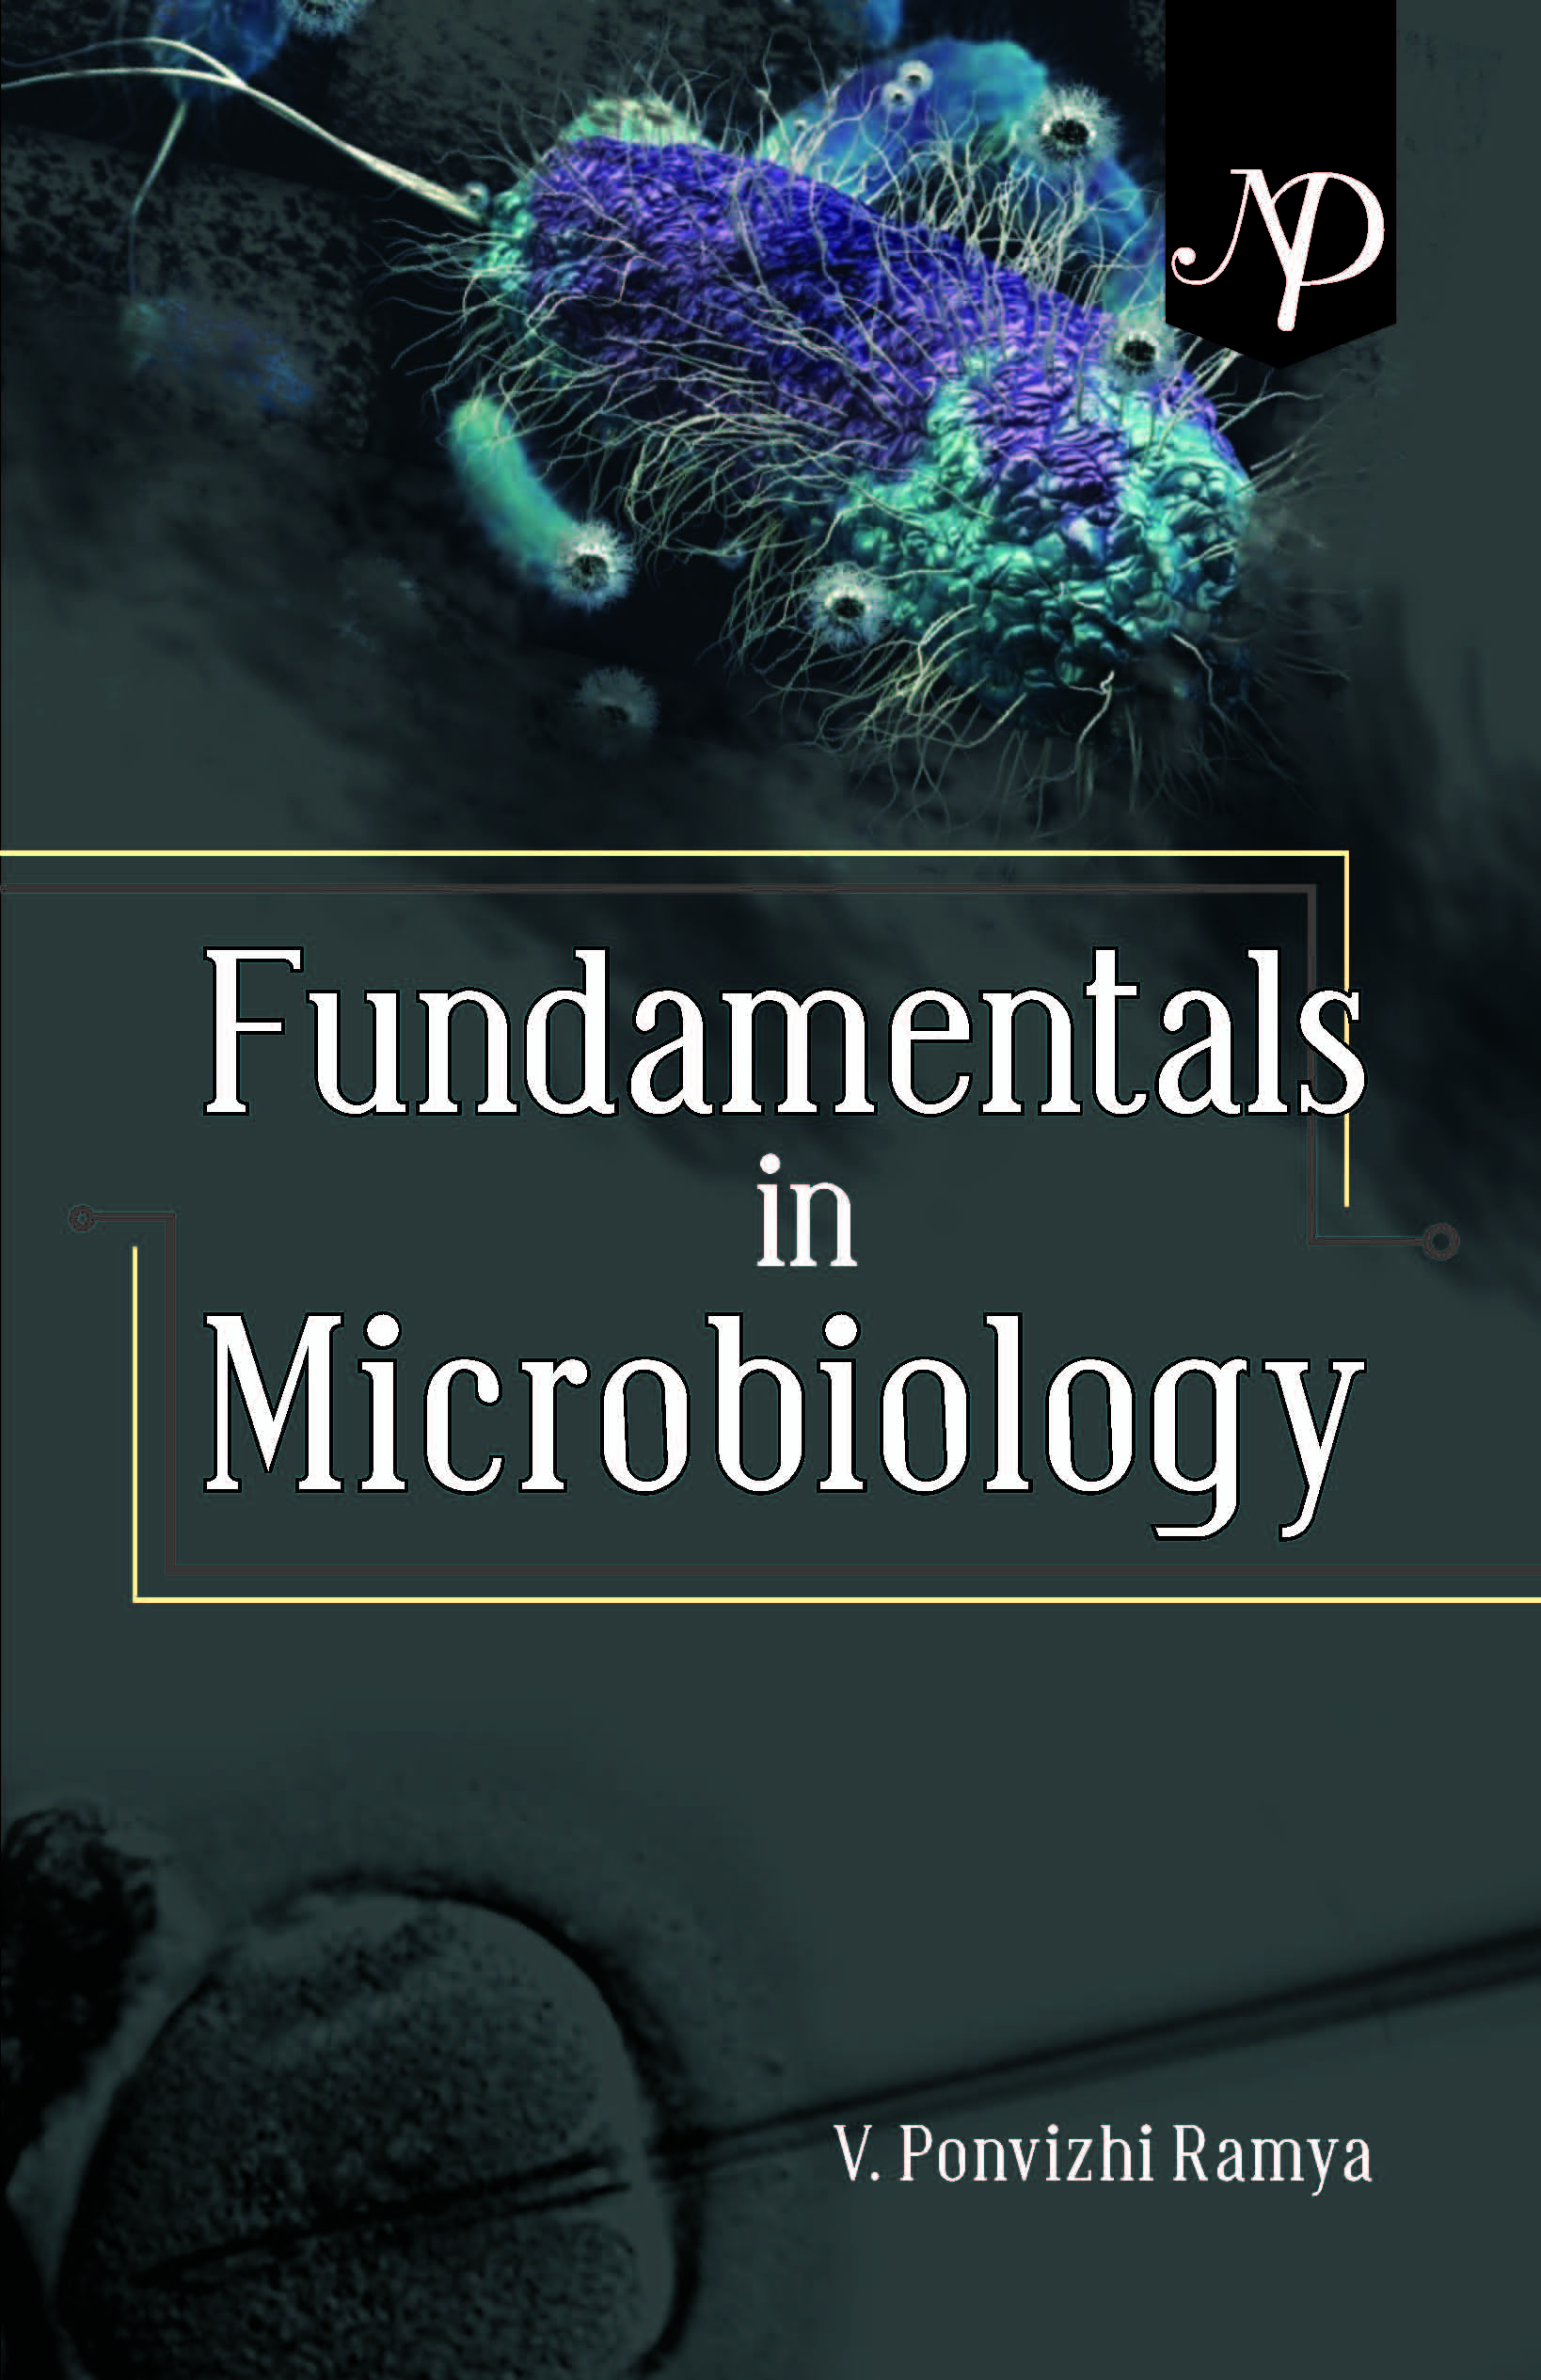 Fundamentals in Microbiology